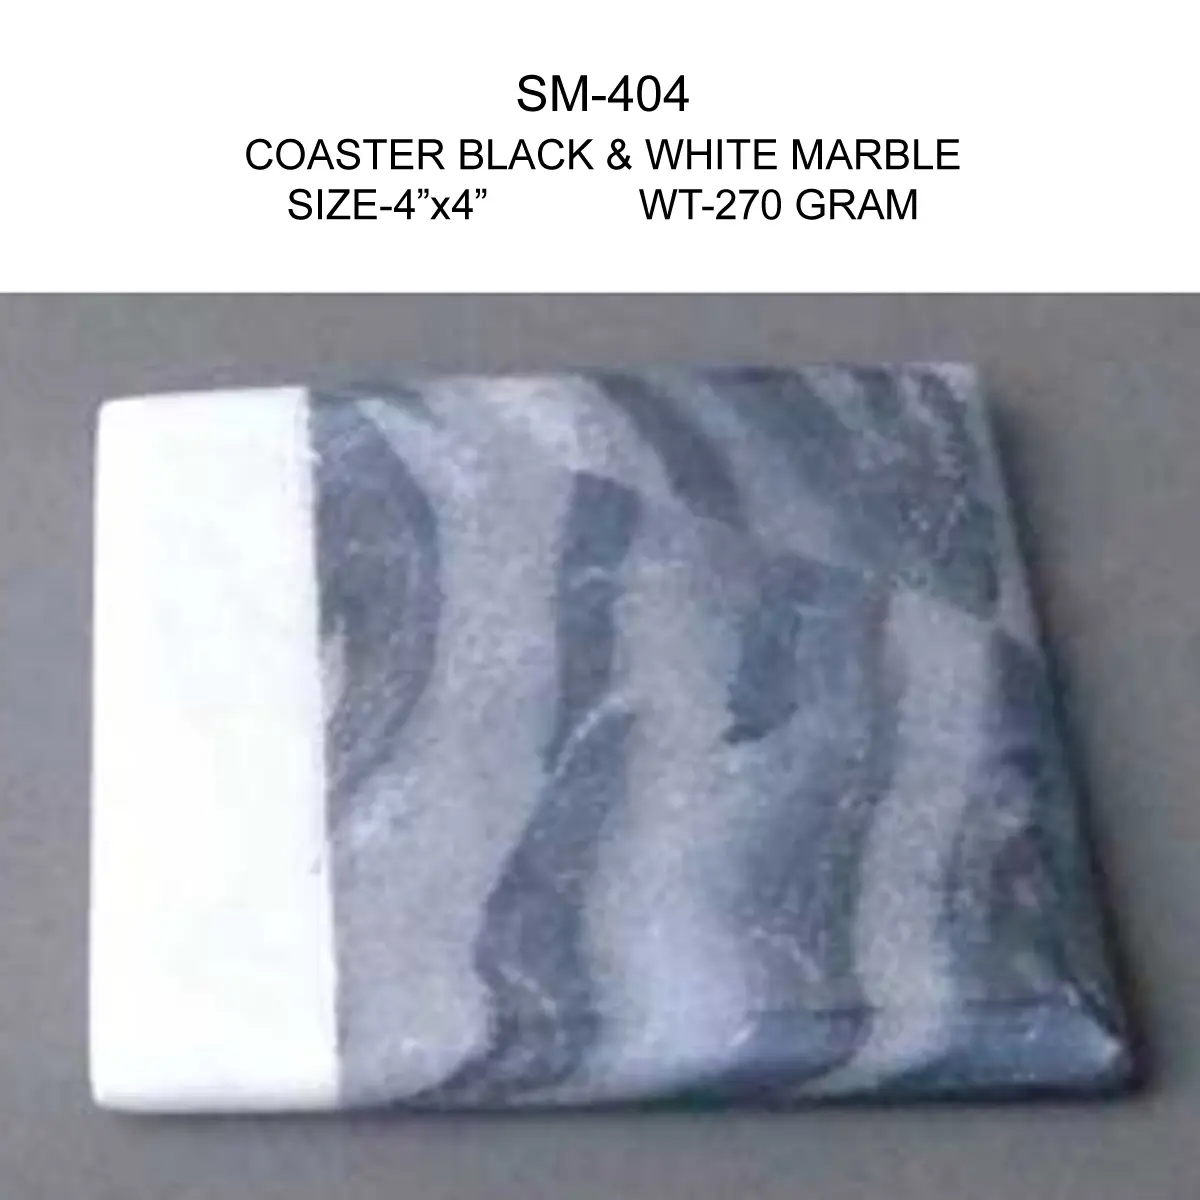 COASTER WHITE AND BLACK MARBLE